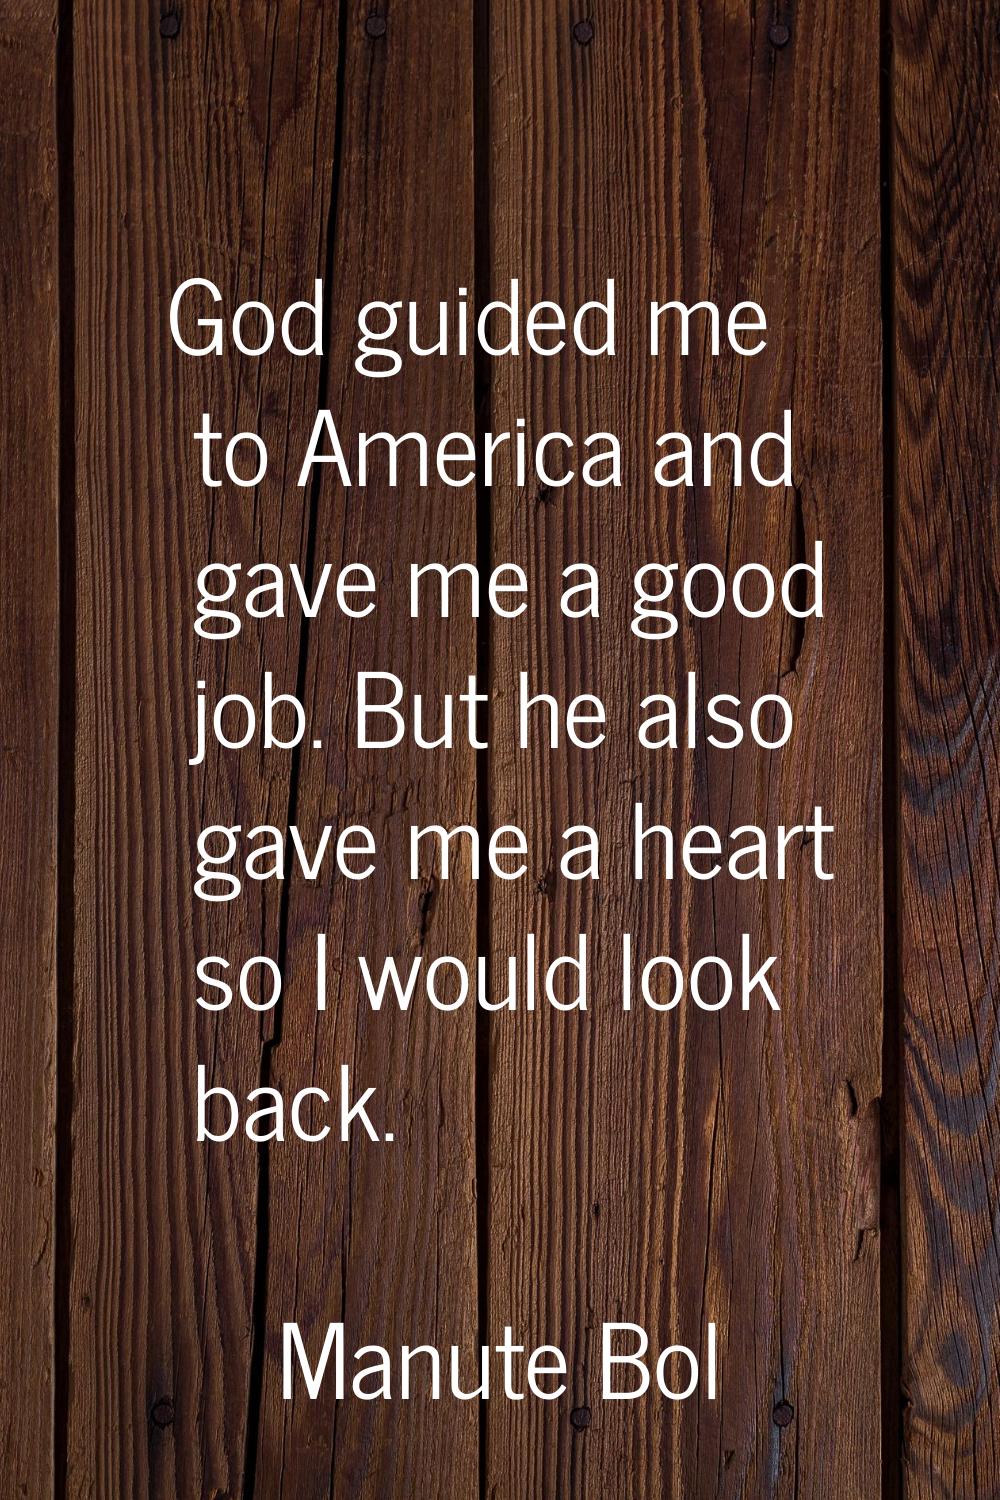 God guided me to America and gave me a good job. But he also gave me a heart so I would look back.